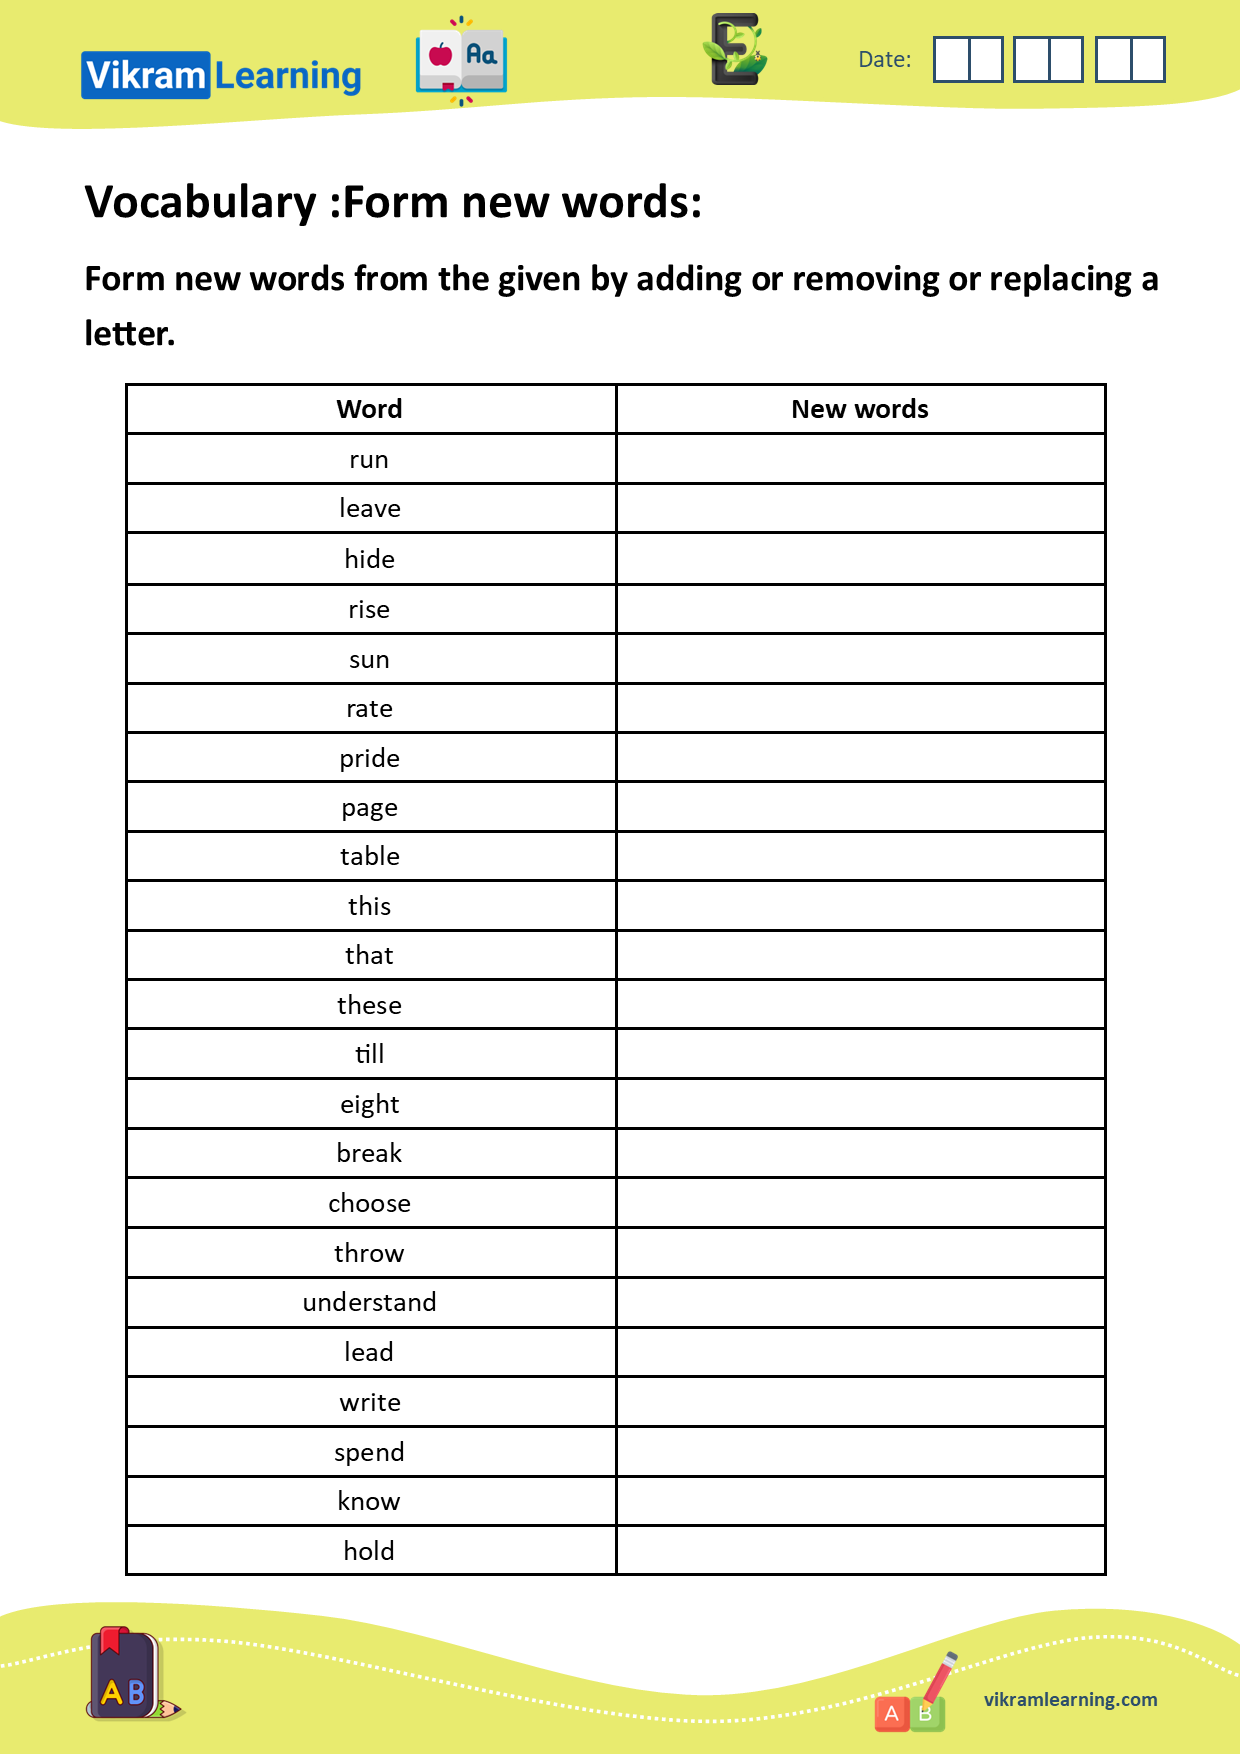 Download vocabulary: unscramble words, form new words, words ladder, forming new words by adding, removing, or replacing letters, build new words, example: understand
: under, stand, dun, den, and, un, eight: night, right, hit, get, etc. worksheets